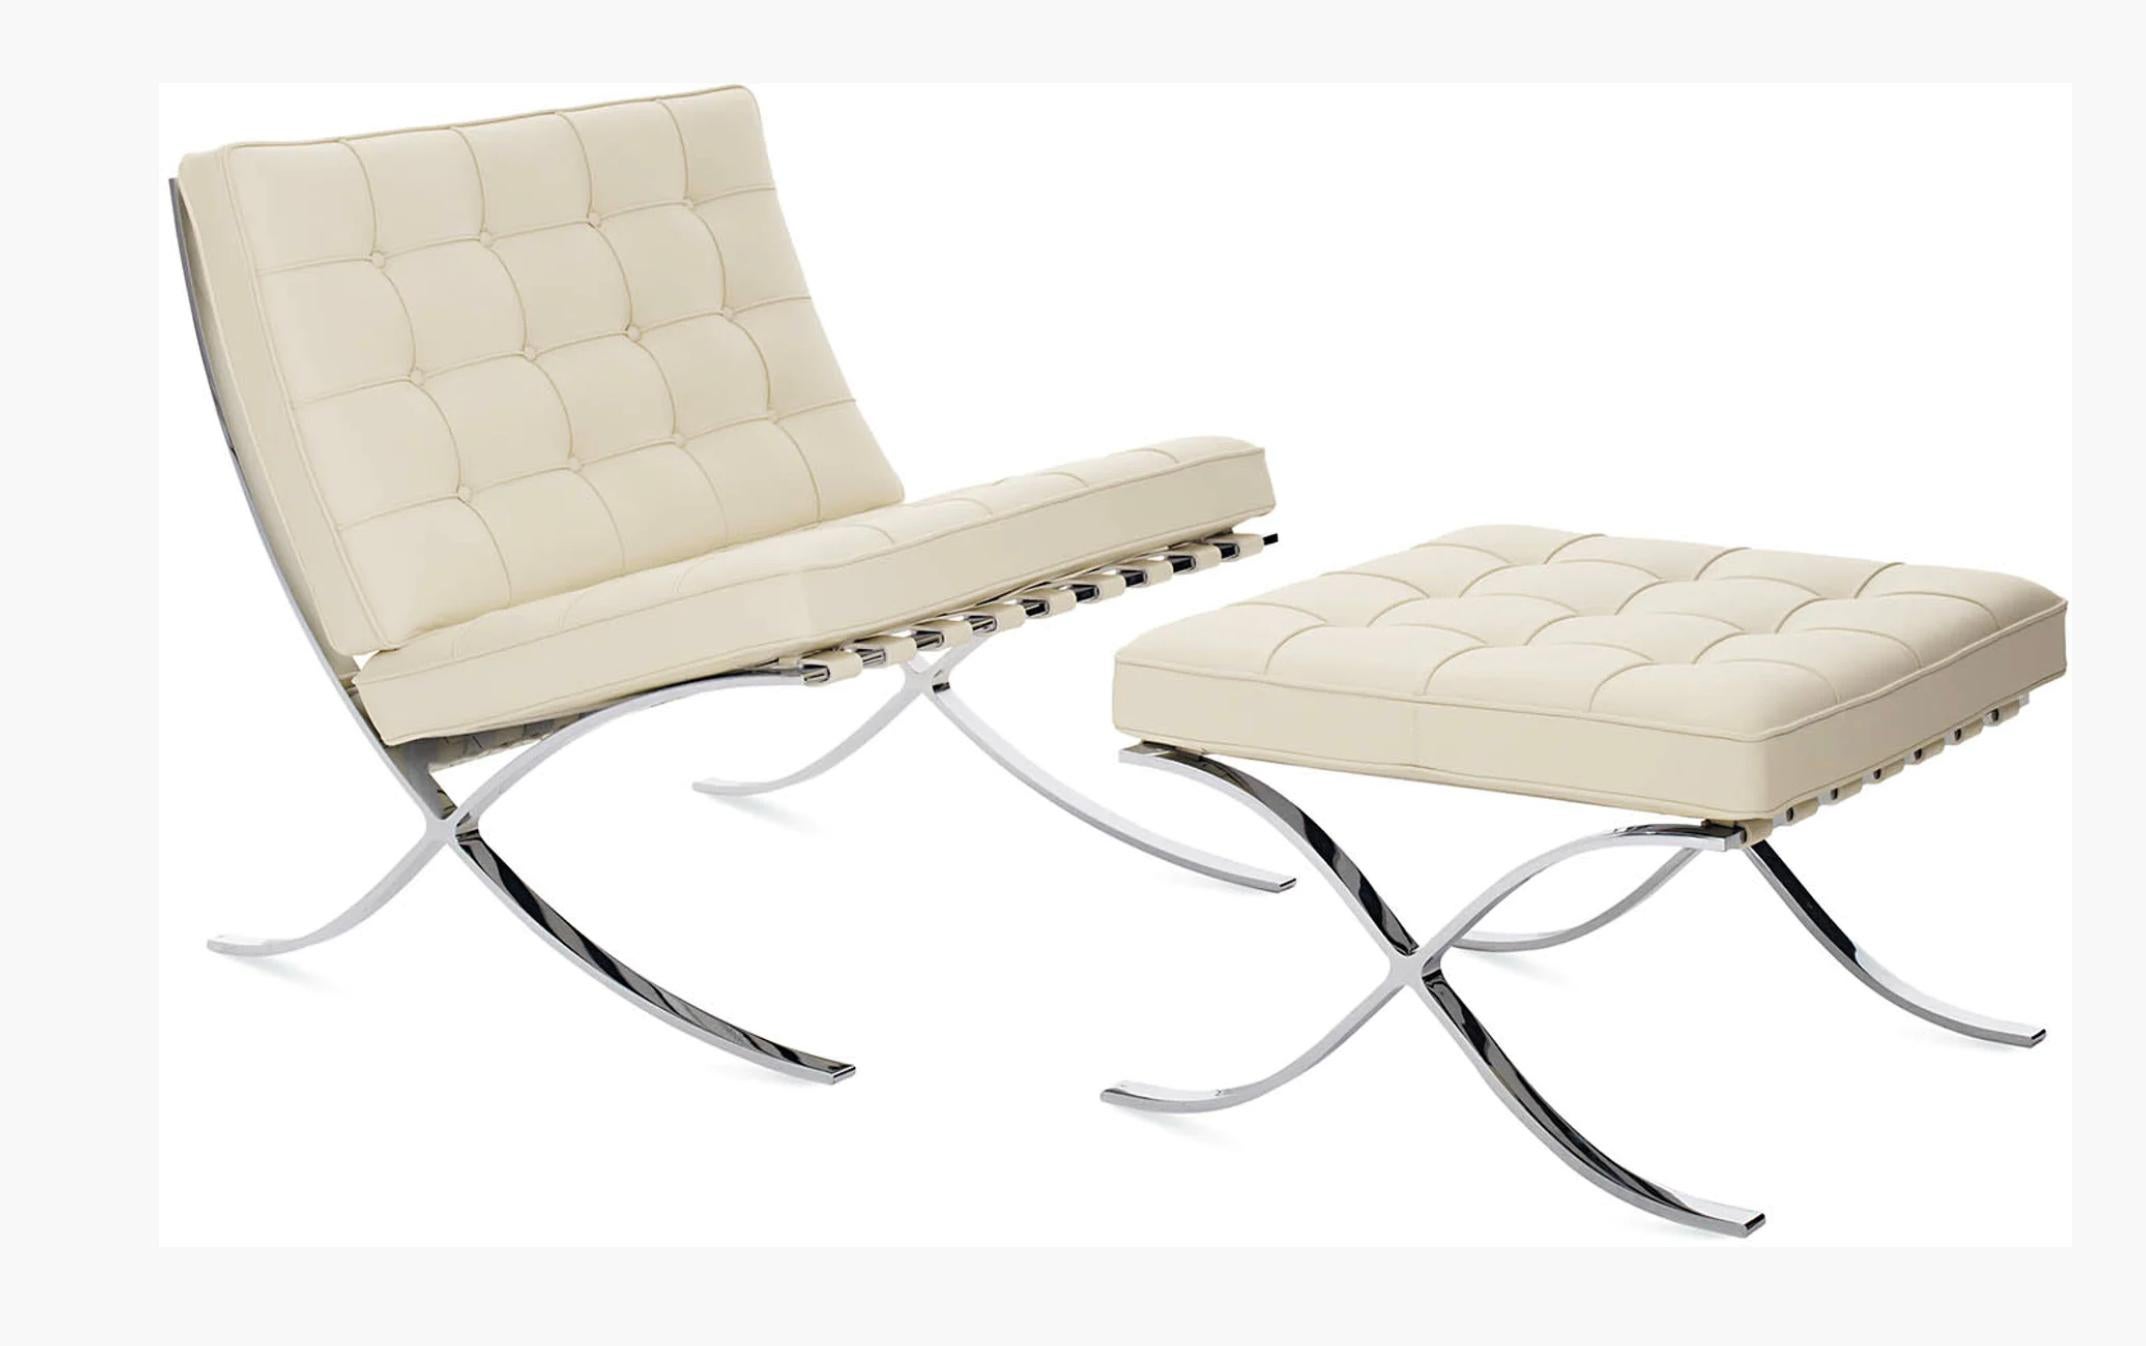 Knoll Barcelona lounge chair, ivory leather, Mies van der Rohe. Labelled. Listing is for two chairs and one ottoman. 

One of the most recognized objects of the last century, and an icon of the modern movement, the Barcelona chair exudes a simple